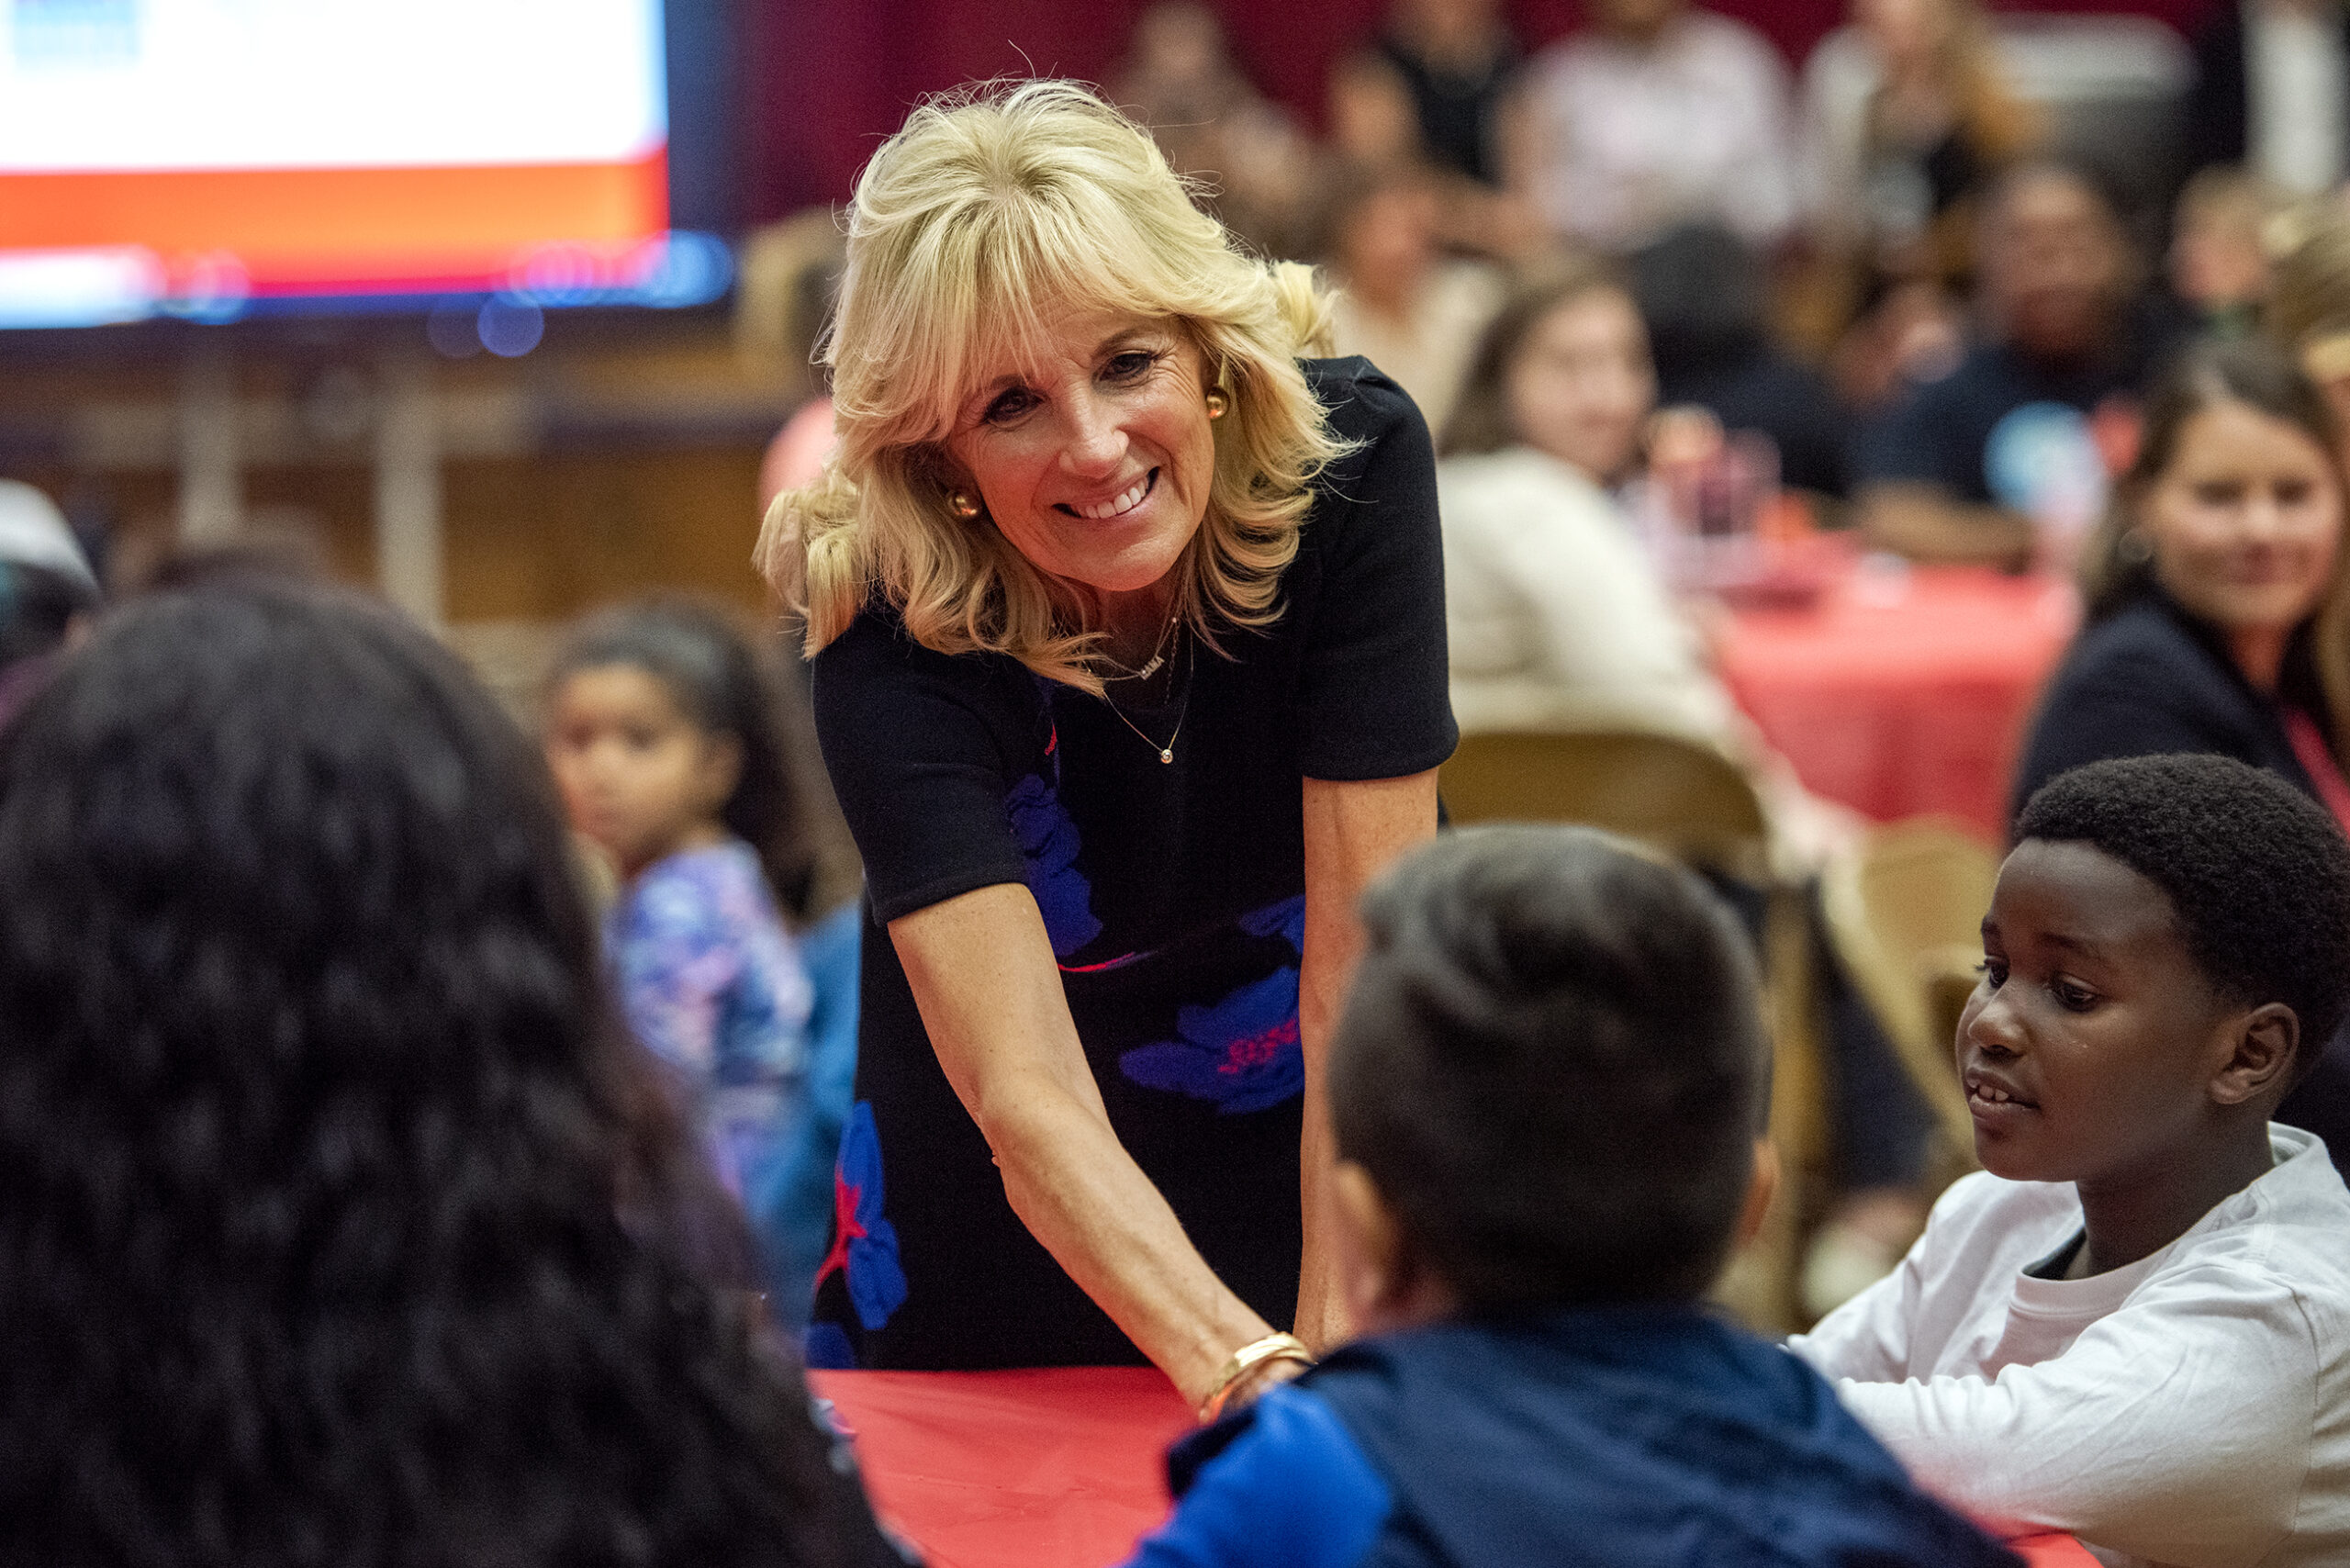 Jill Biden smiles as she leans over a table to shake hands with students and parents.